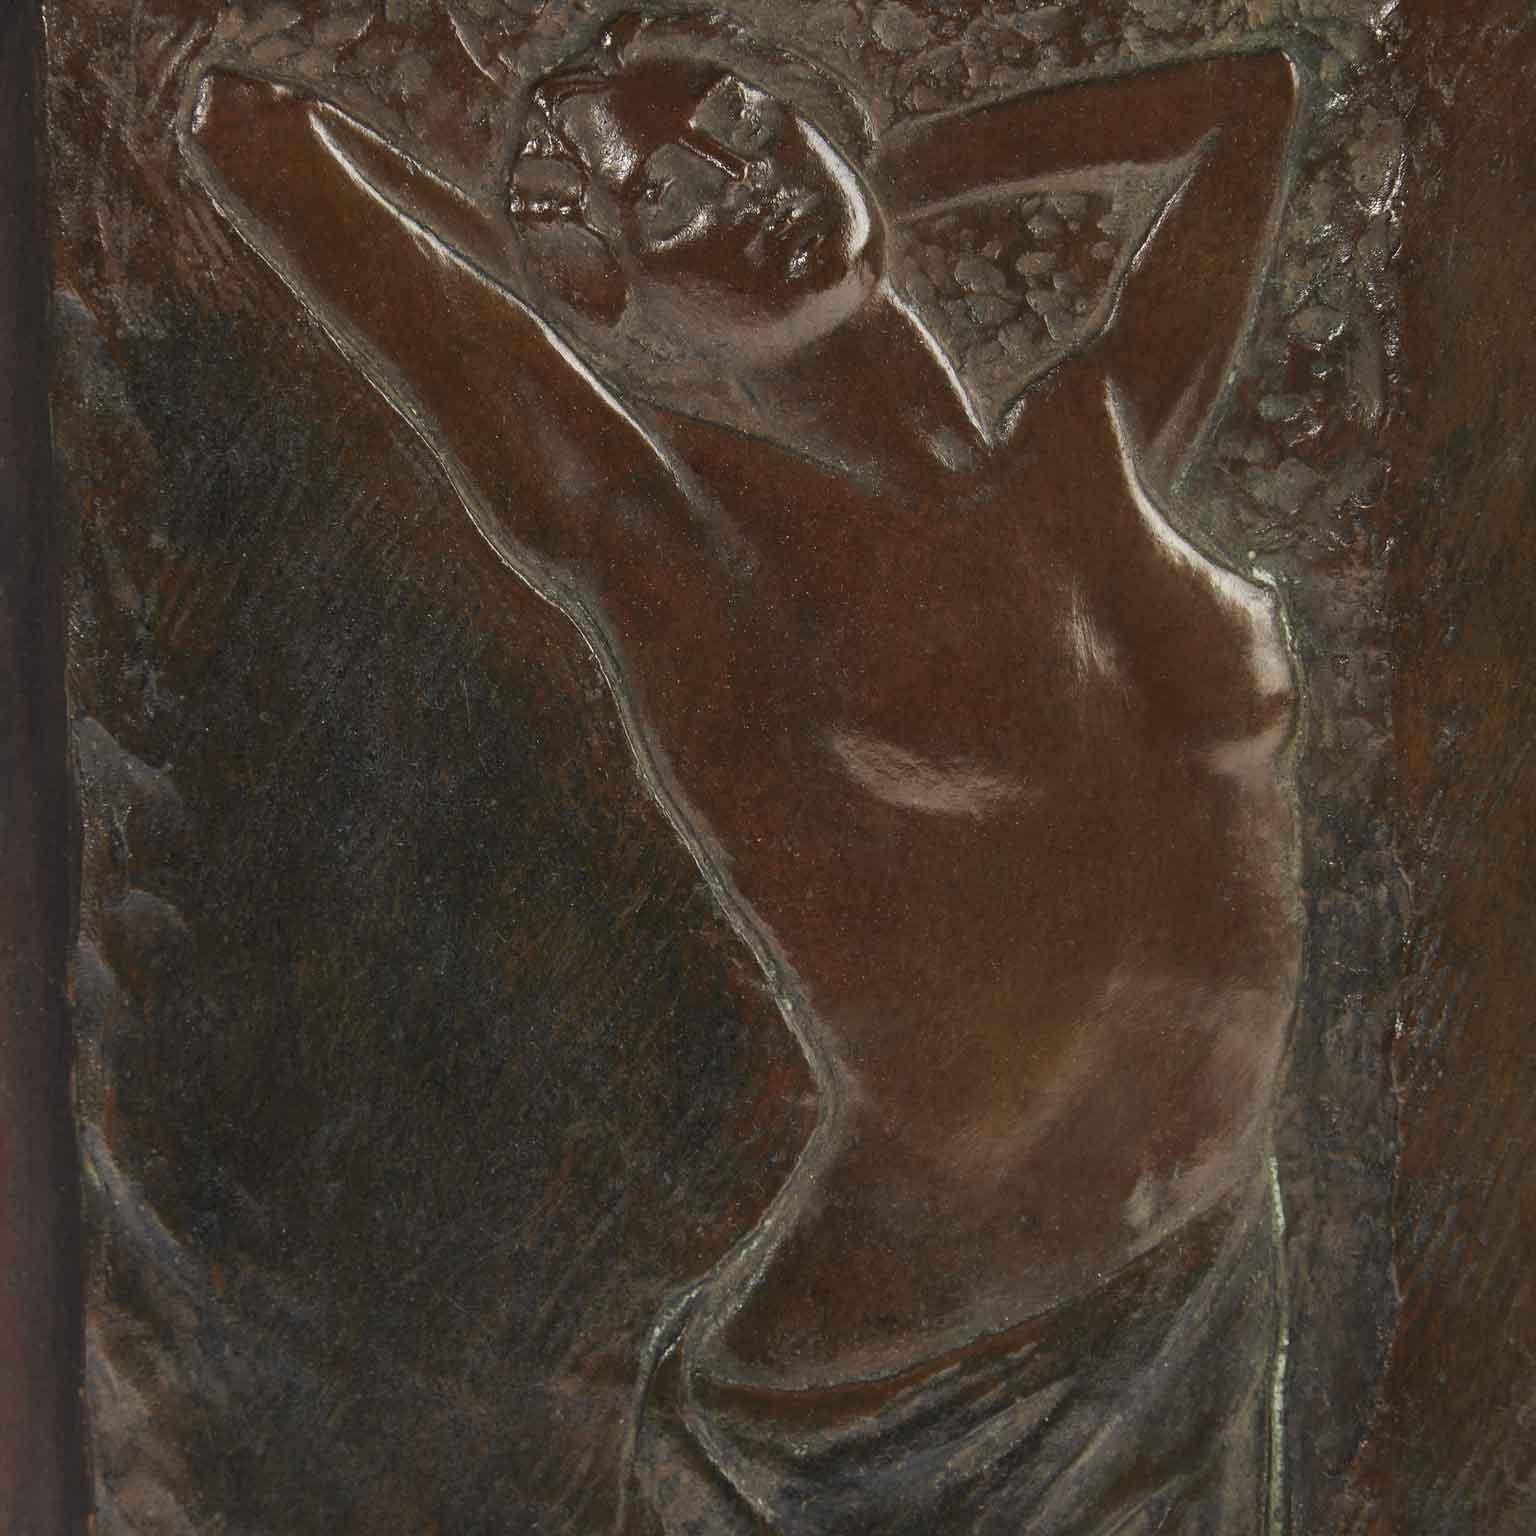 An Italian early 20th century Art Nouveau cast bronze sculpture, a bas-relief depicting a partially nude woman by Goria Lamberto, signed L.Goria Asti (Tortona 1863 – Asti 1927). Mounted on a wooden panel, it is in good age related condition, with a